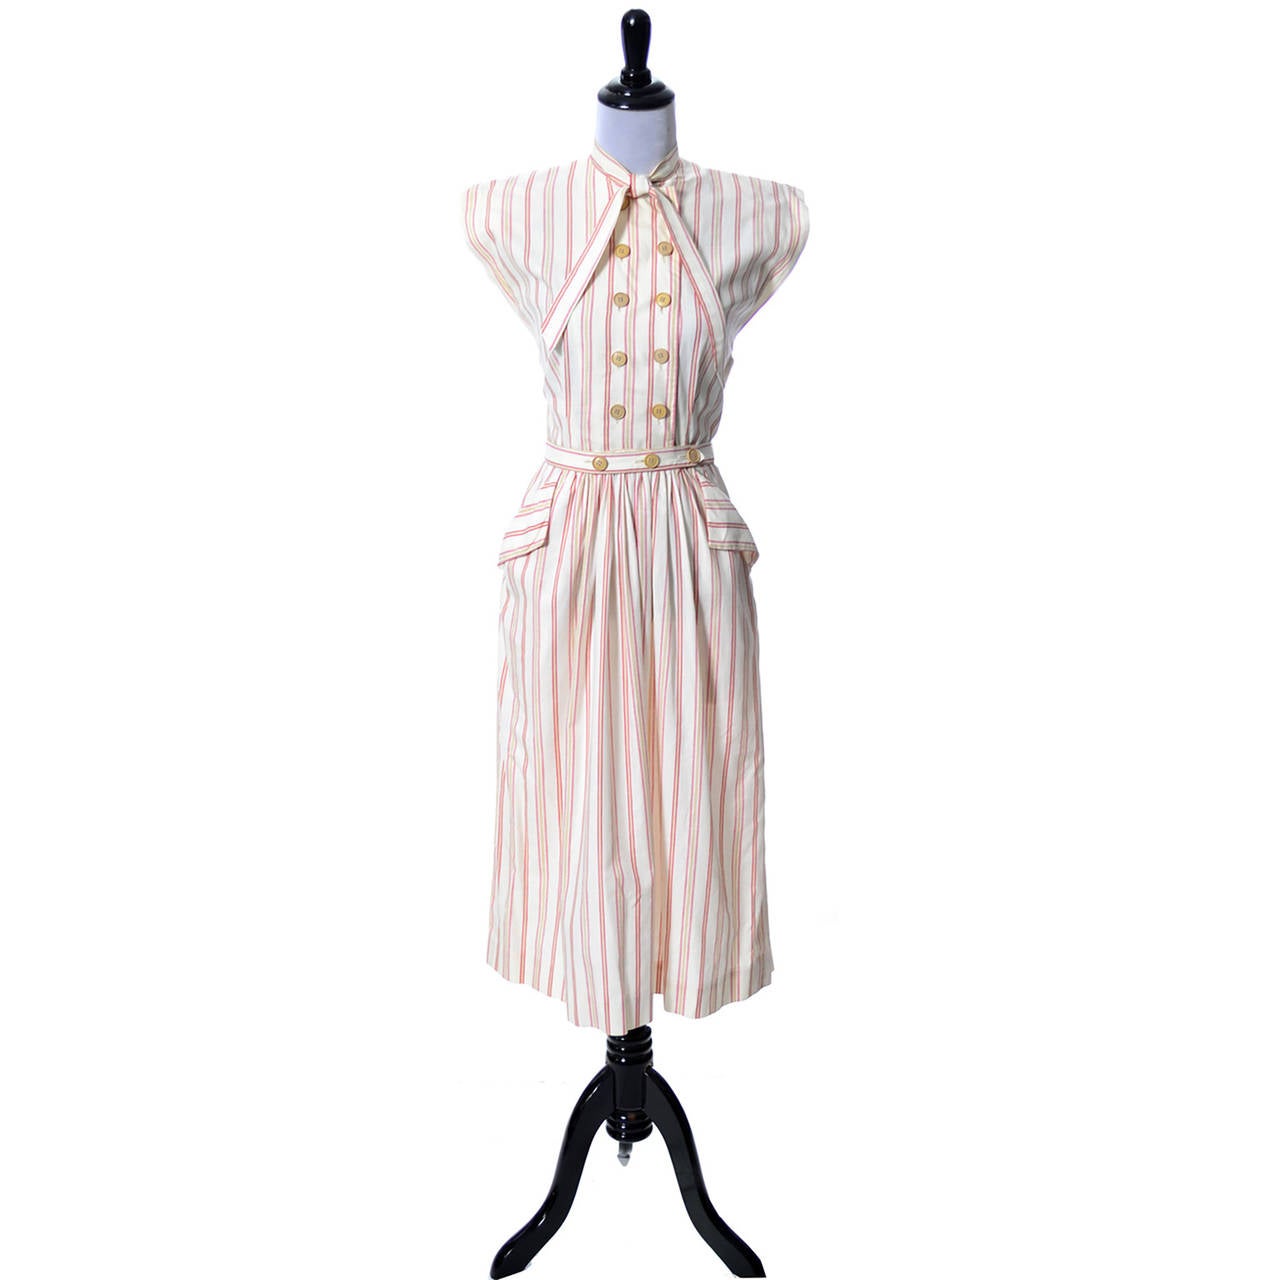 This Claire McCardell vintage dress is from the 1940s and came from one of the finest estates of vintage mid century designer clothing I've ever had the privilege of handling.  The dress is made of a red striped cotton and has a double breasted